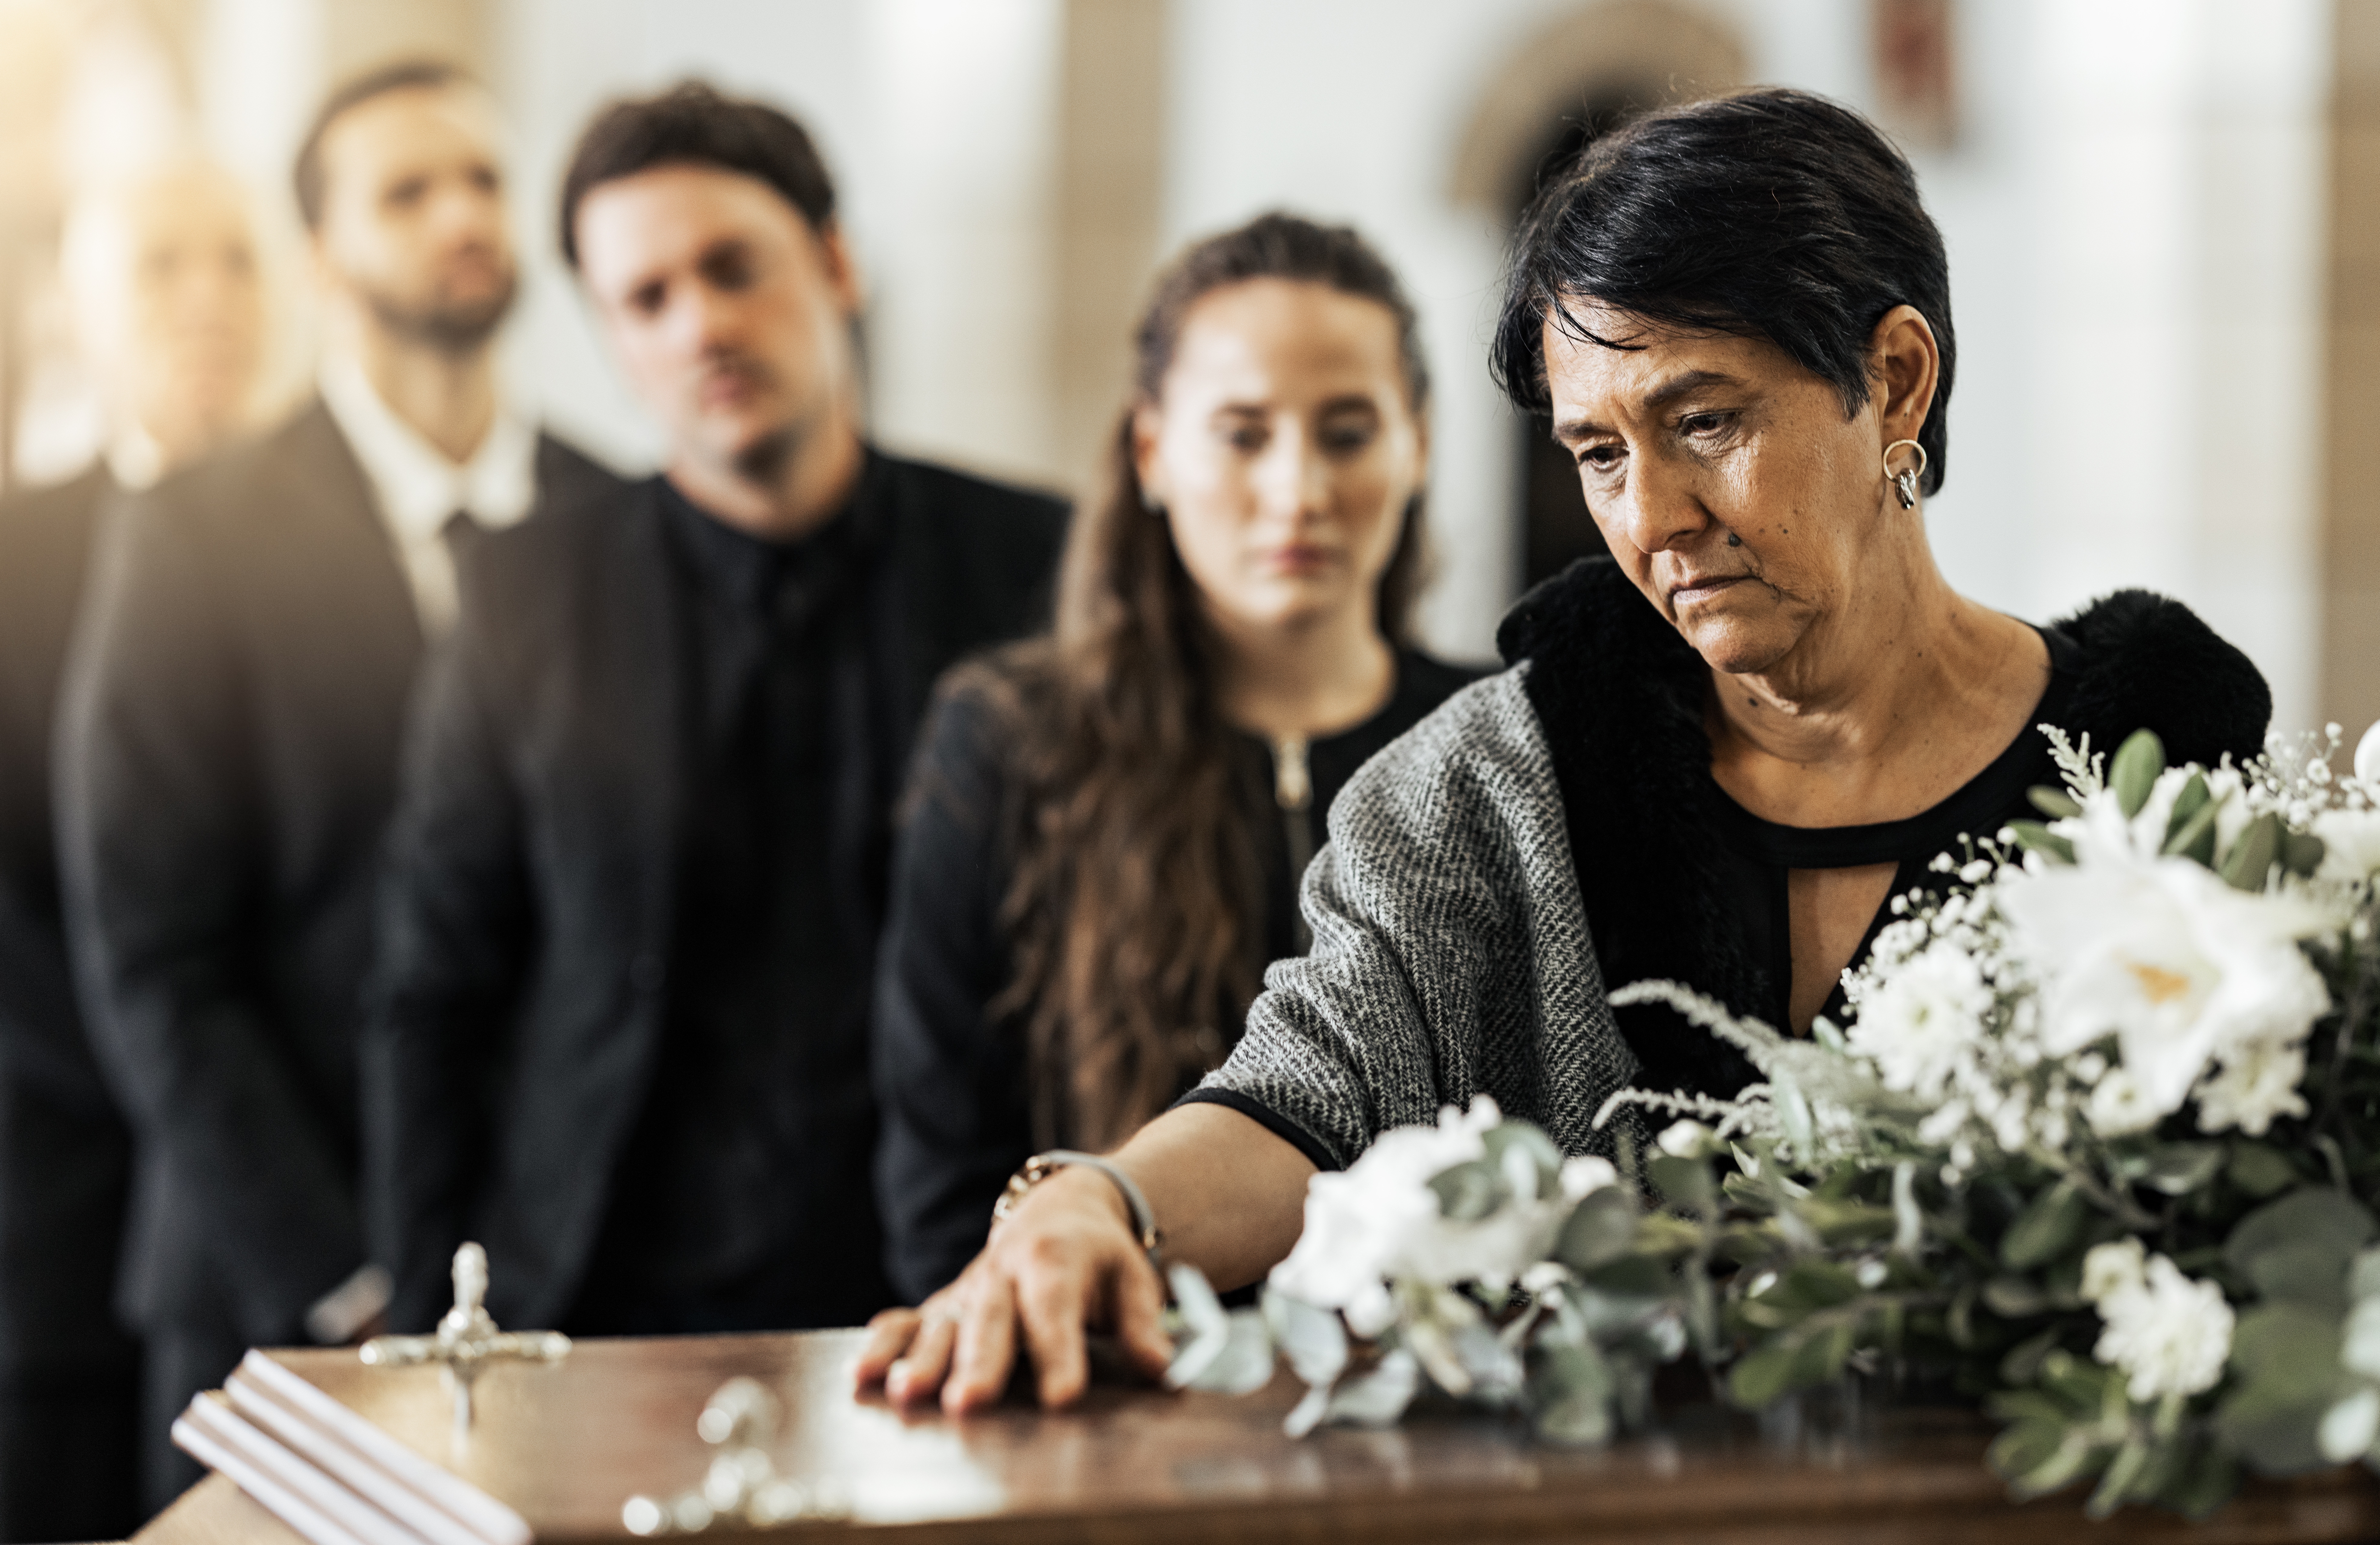 A woman placing her hand on the coffin during a funeral service | Source: Shutterstock